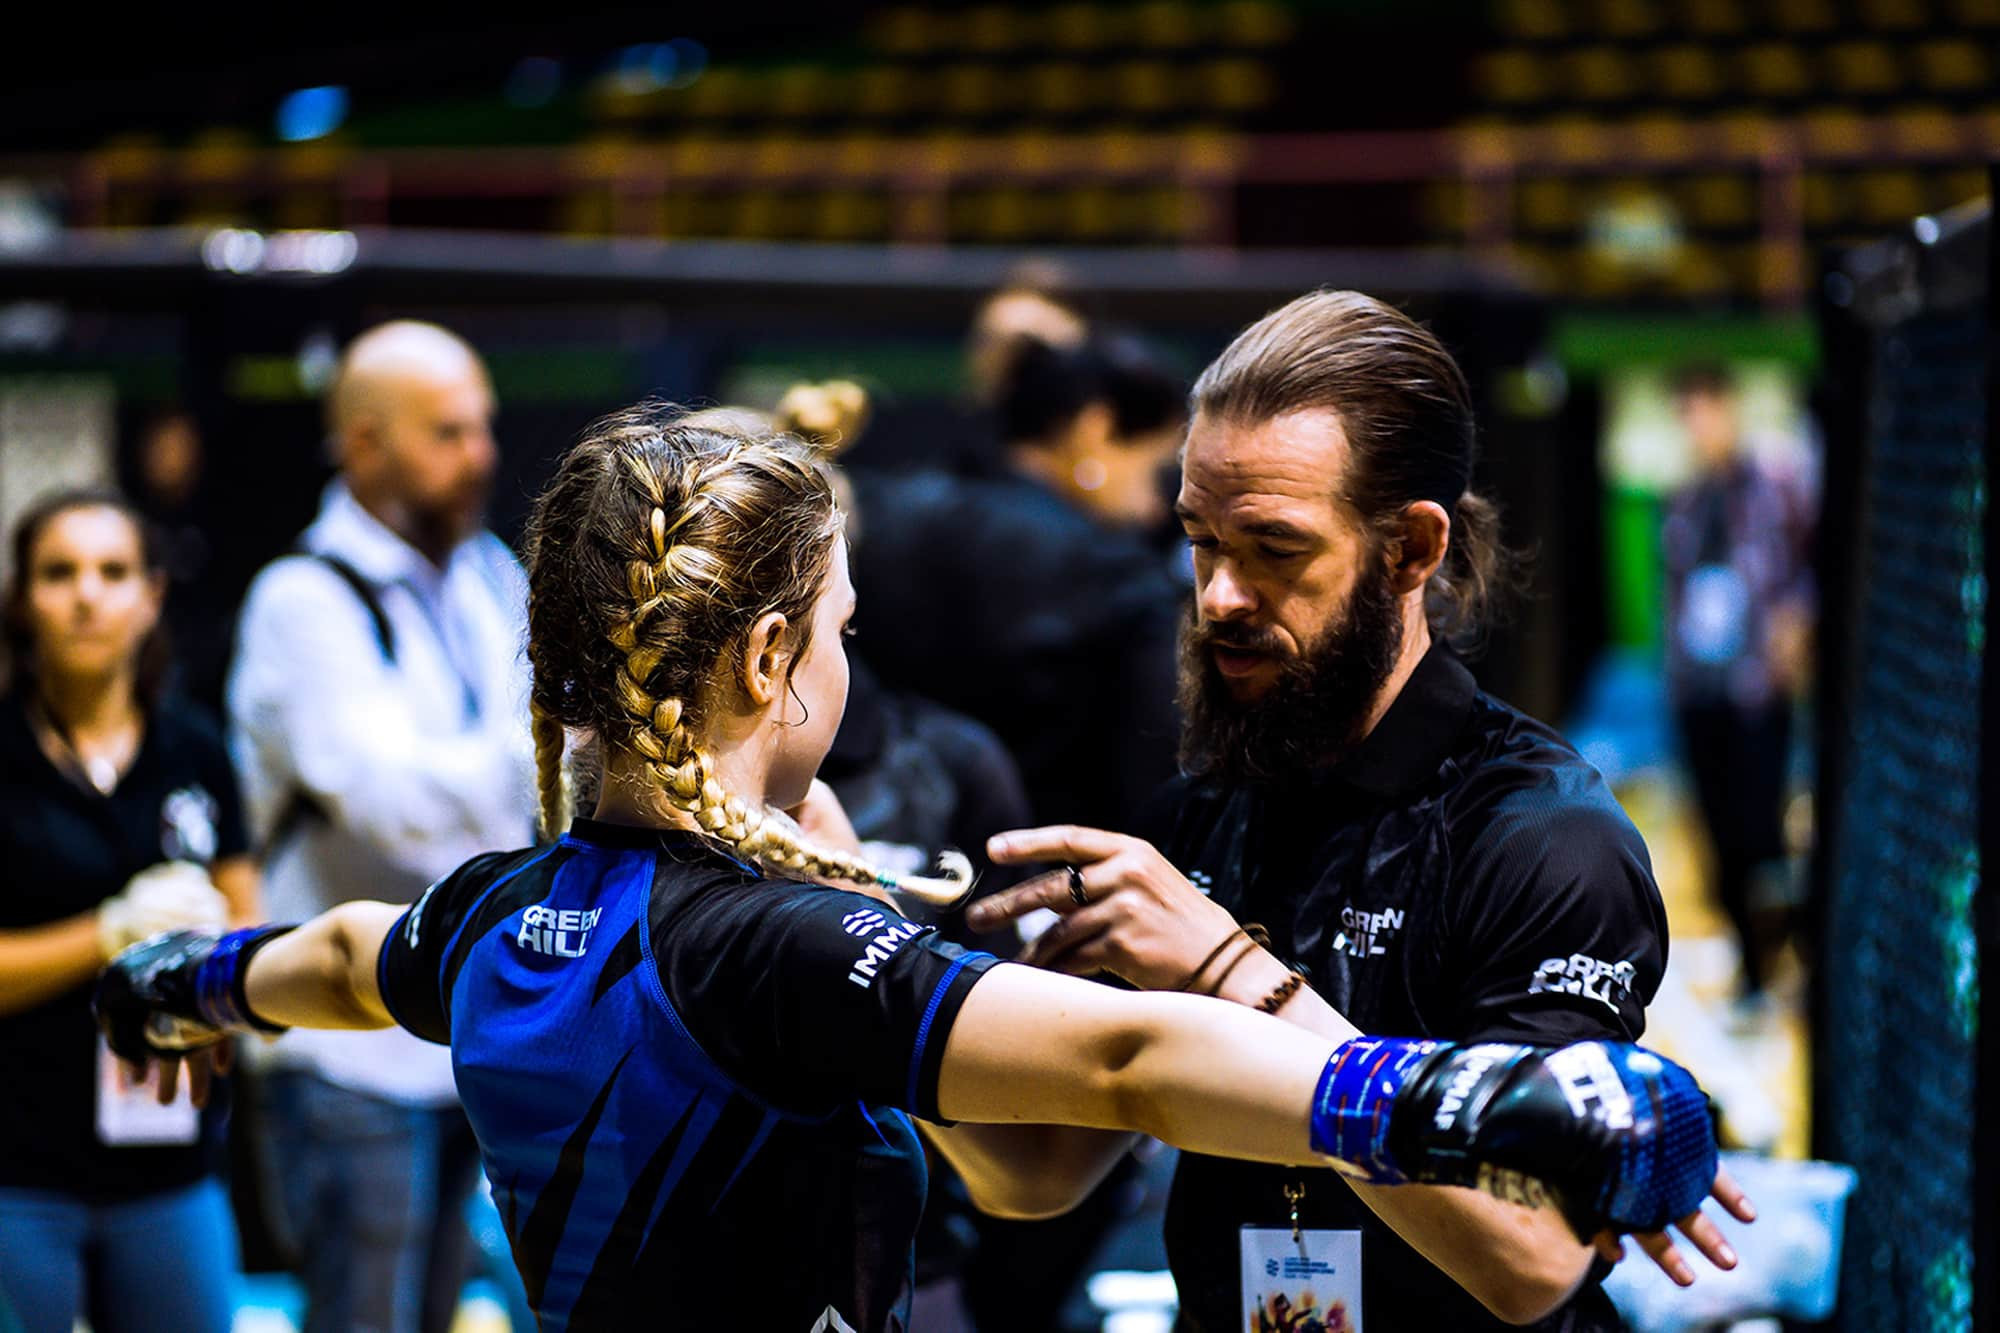 Youth development plays a large part in IMMAF's ambitions to grow mixed martial arts ©IMMAF